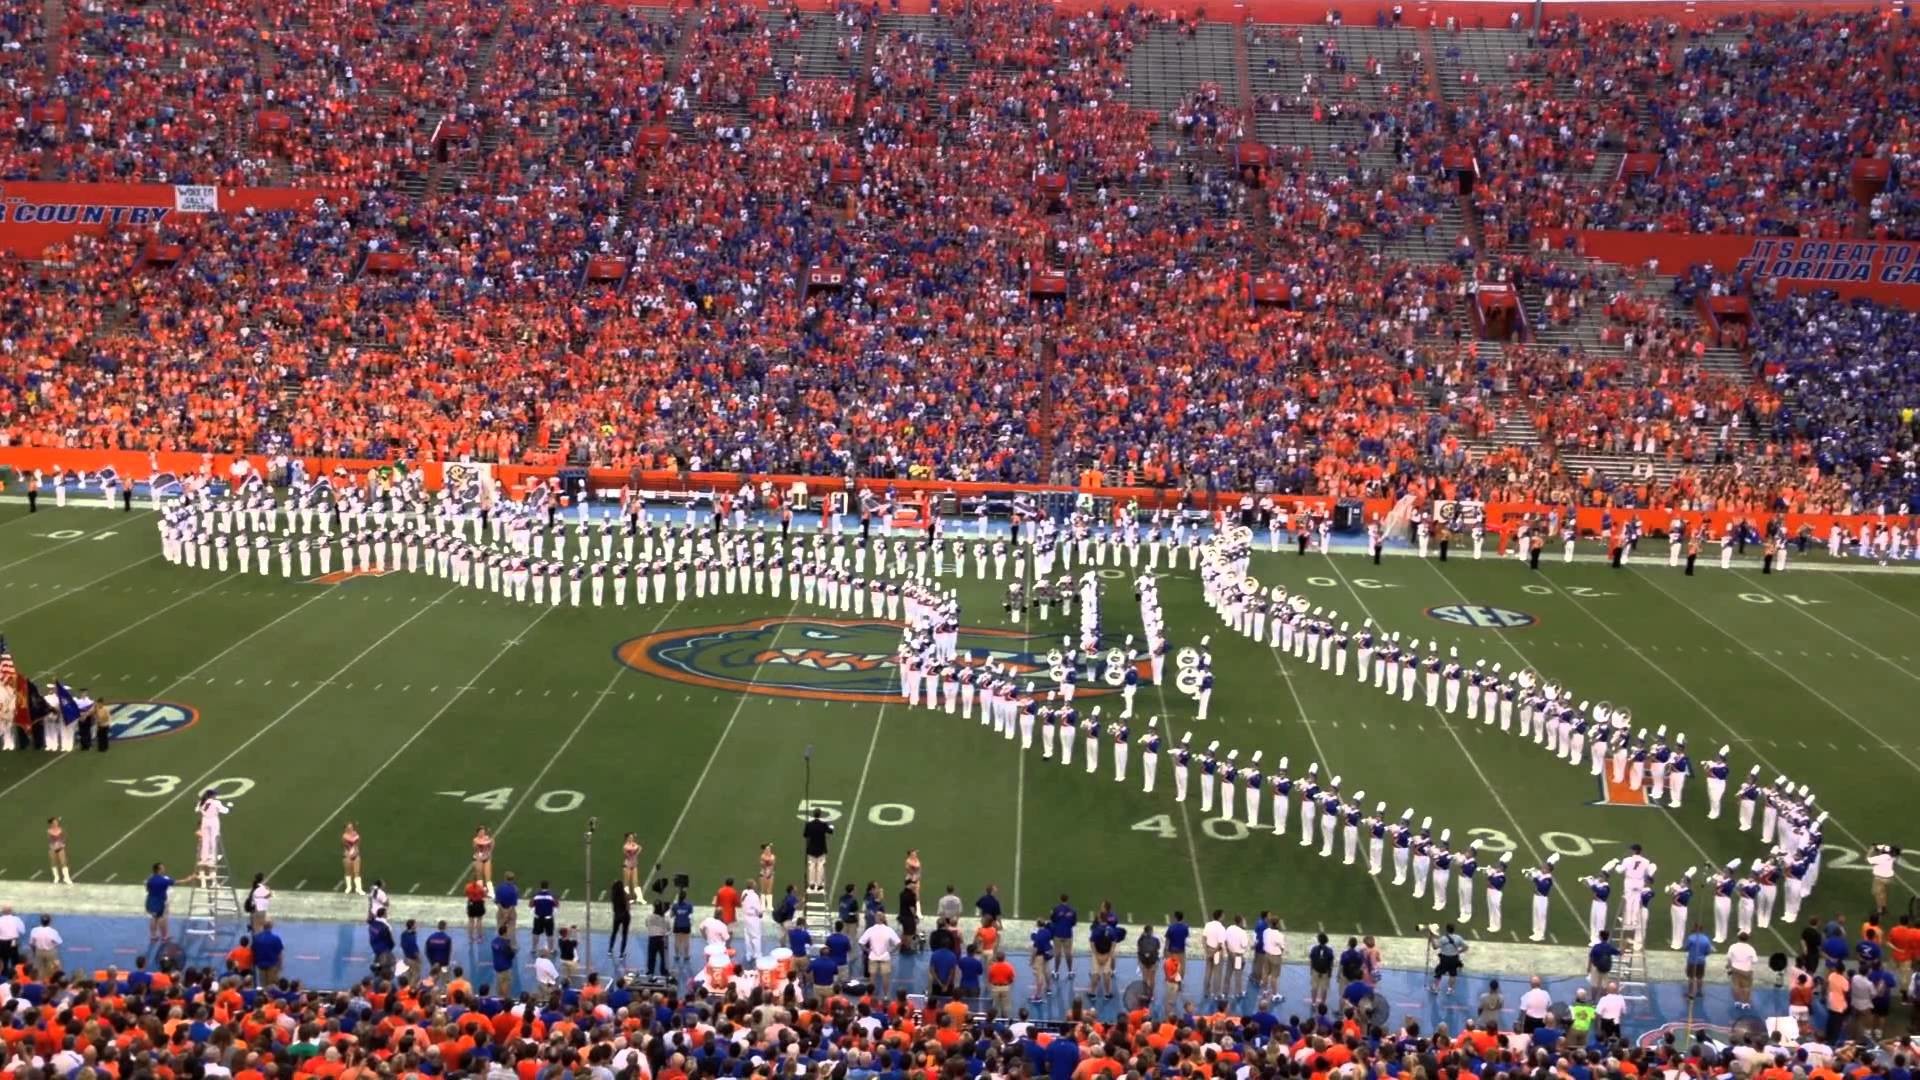 1920x1080 University of Florida - UF Marching Band 9/13/14 - Pre game Part 2 of 5